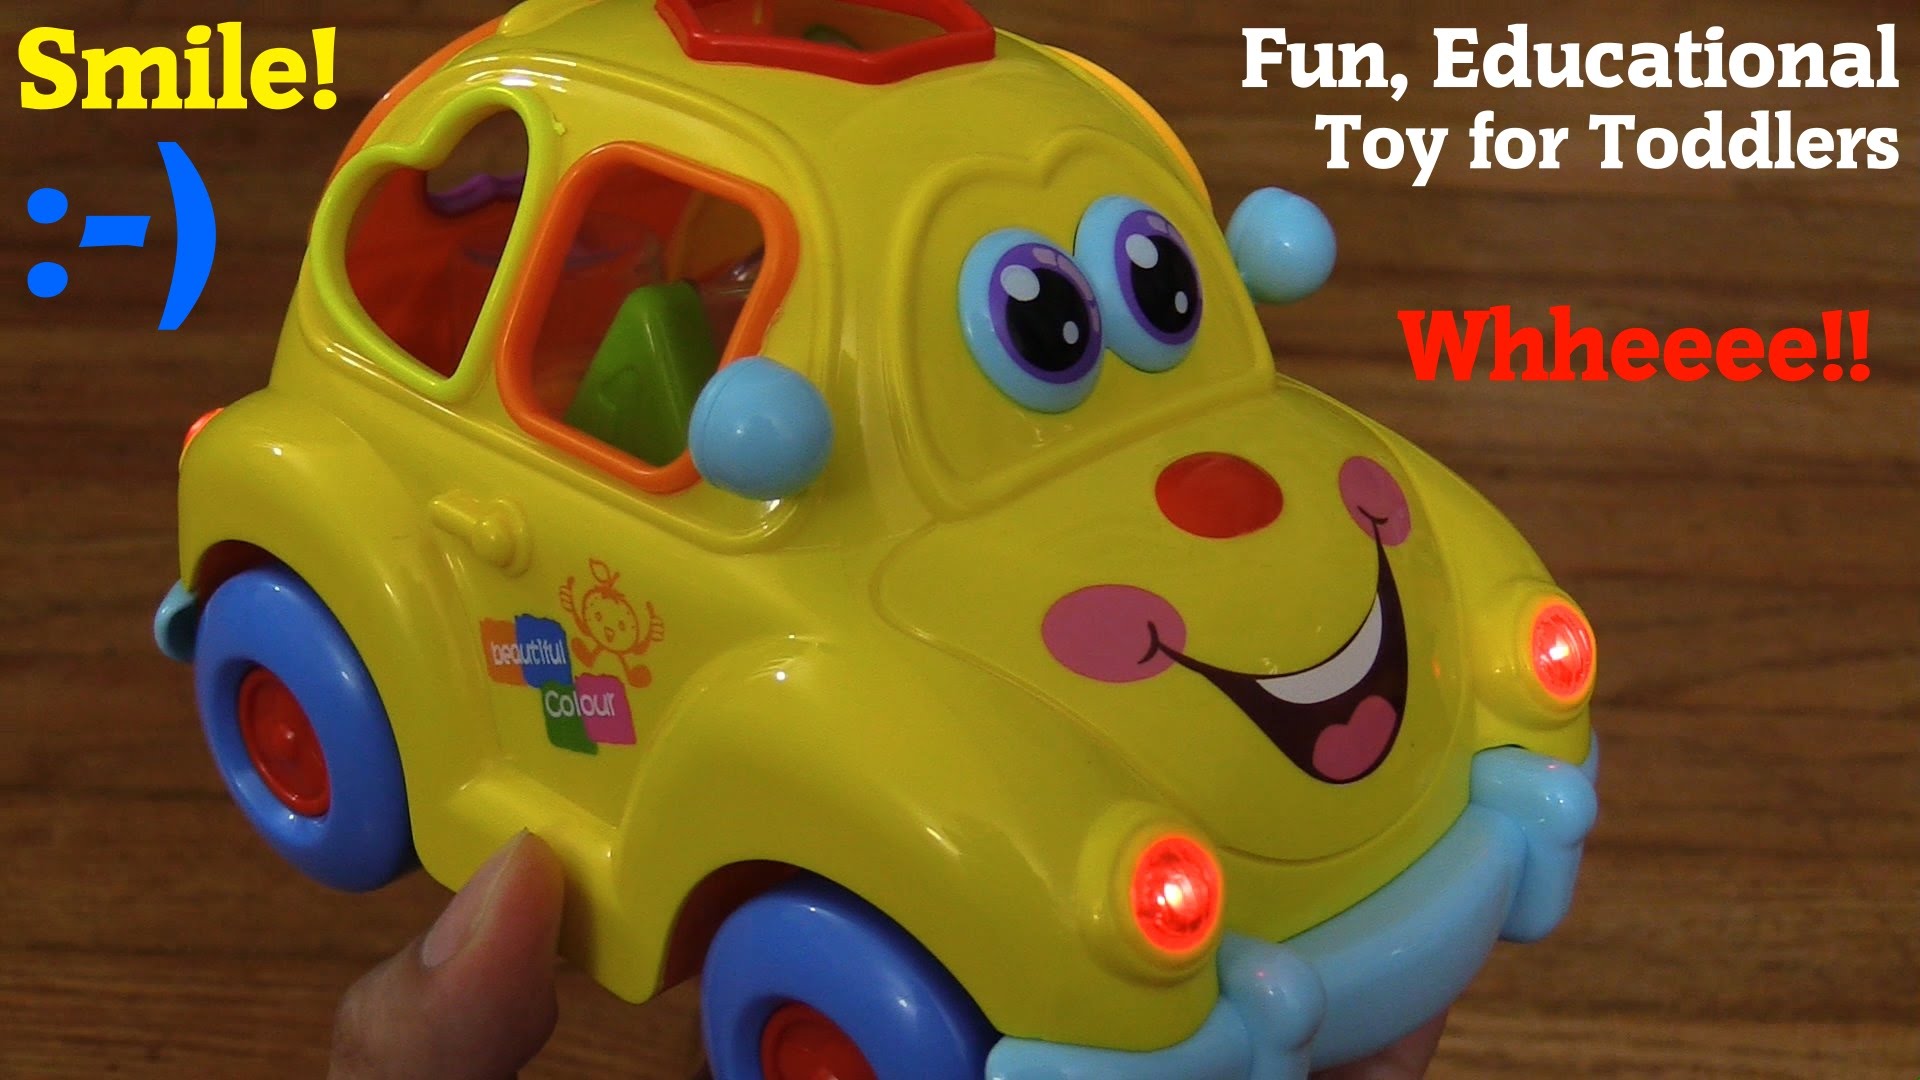 Educational Toy Car For Toddlers: A Yellow Beetle Shapes Sorter Car ...